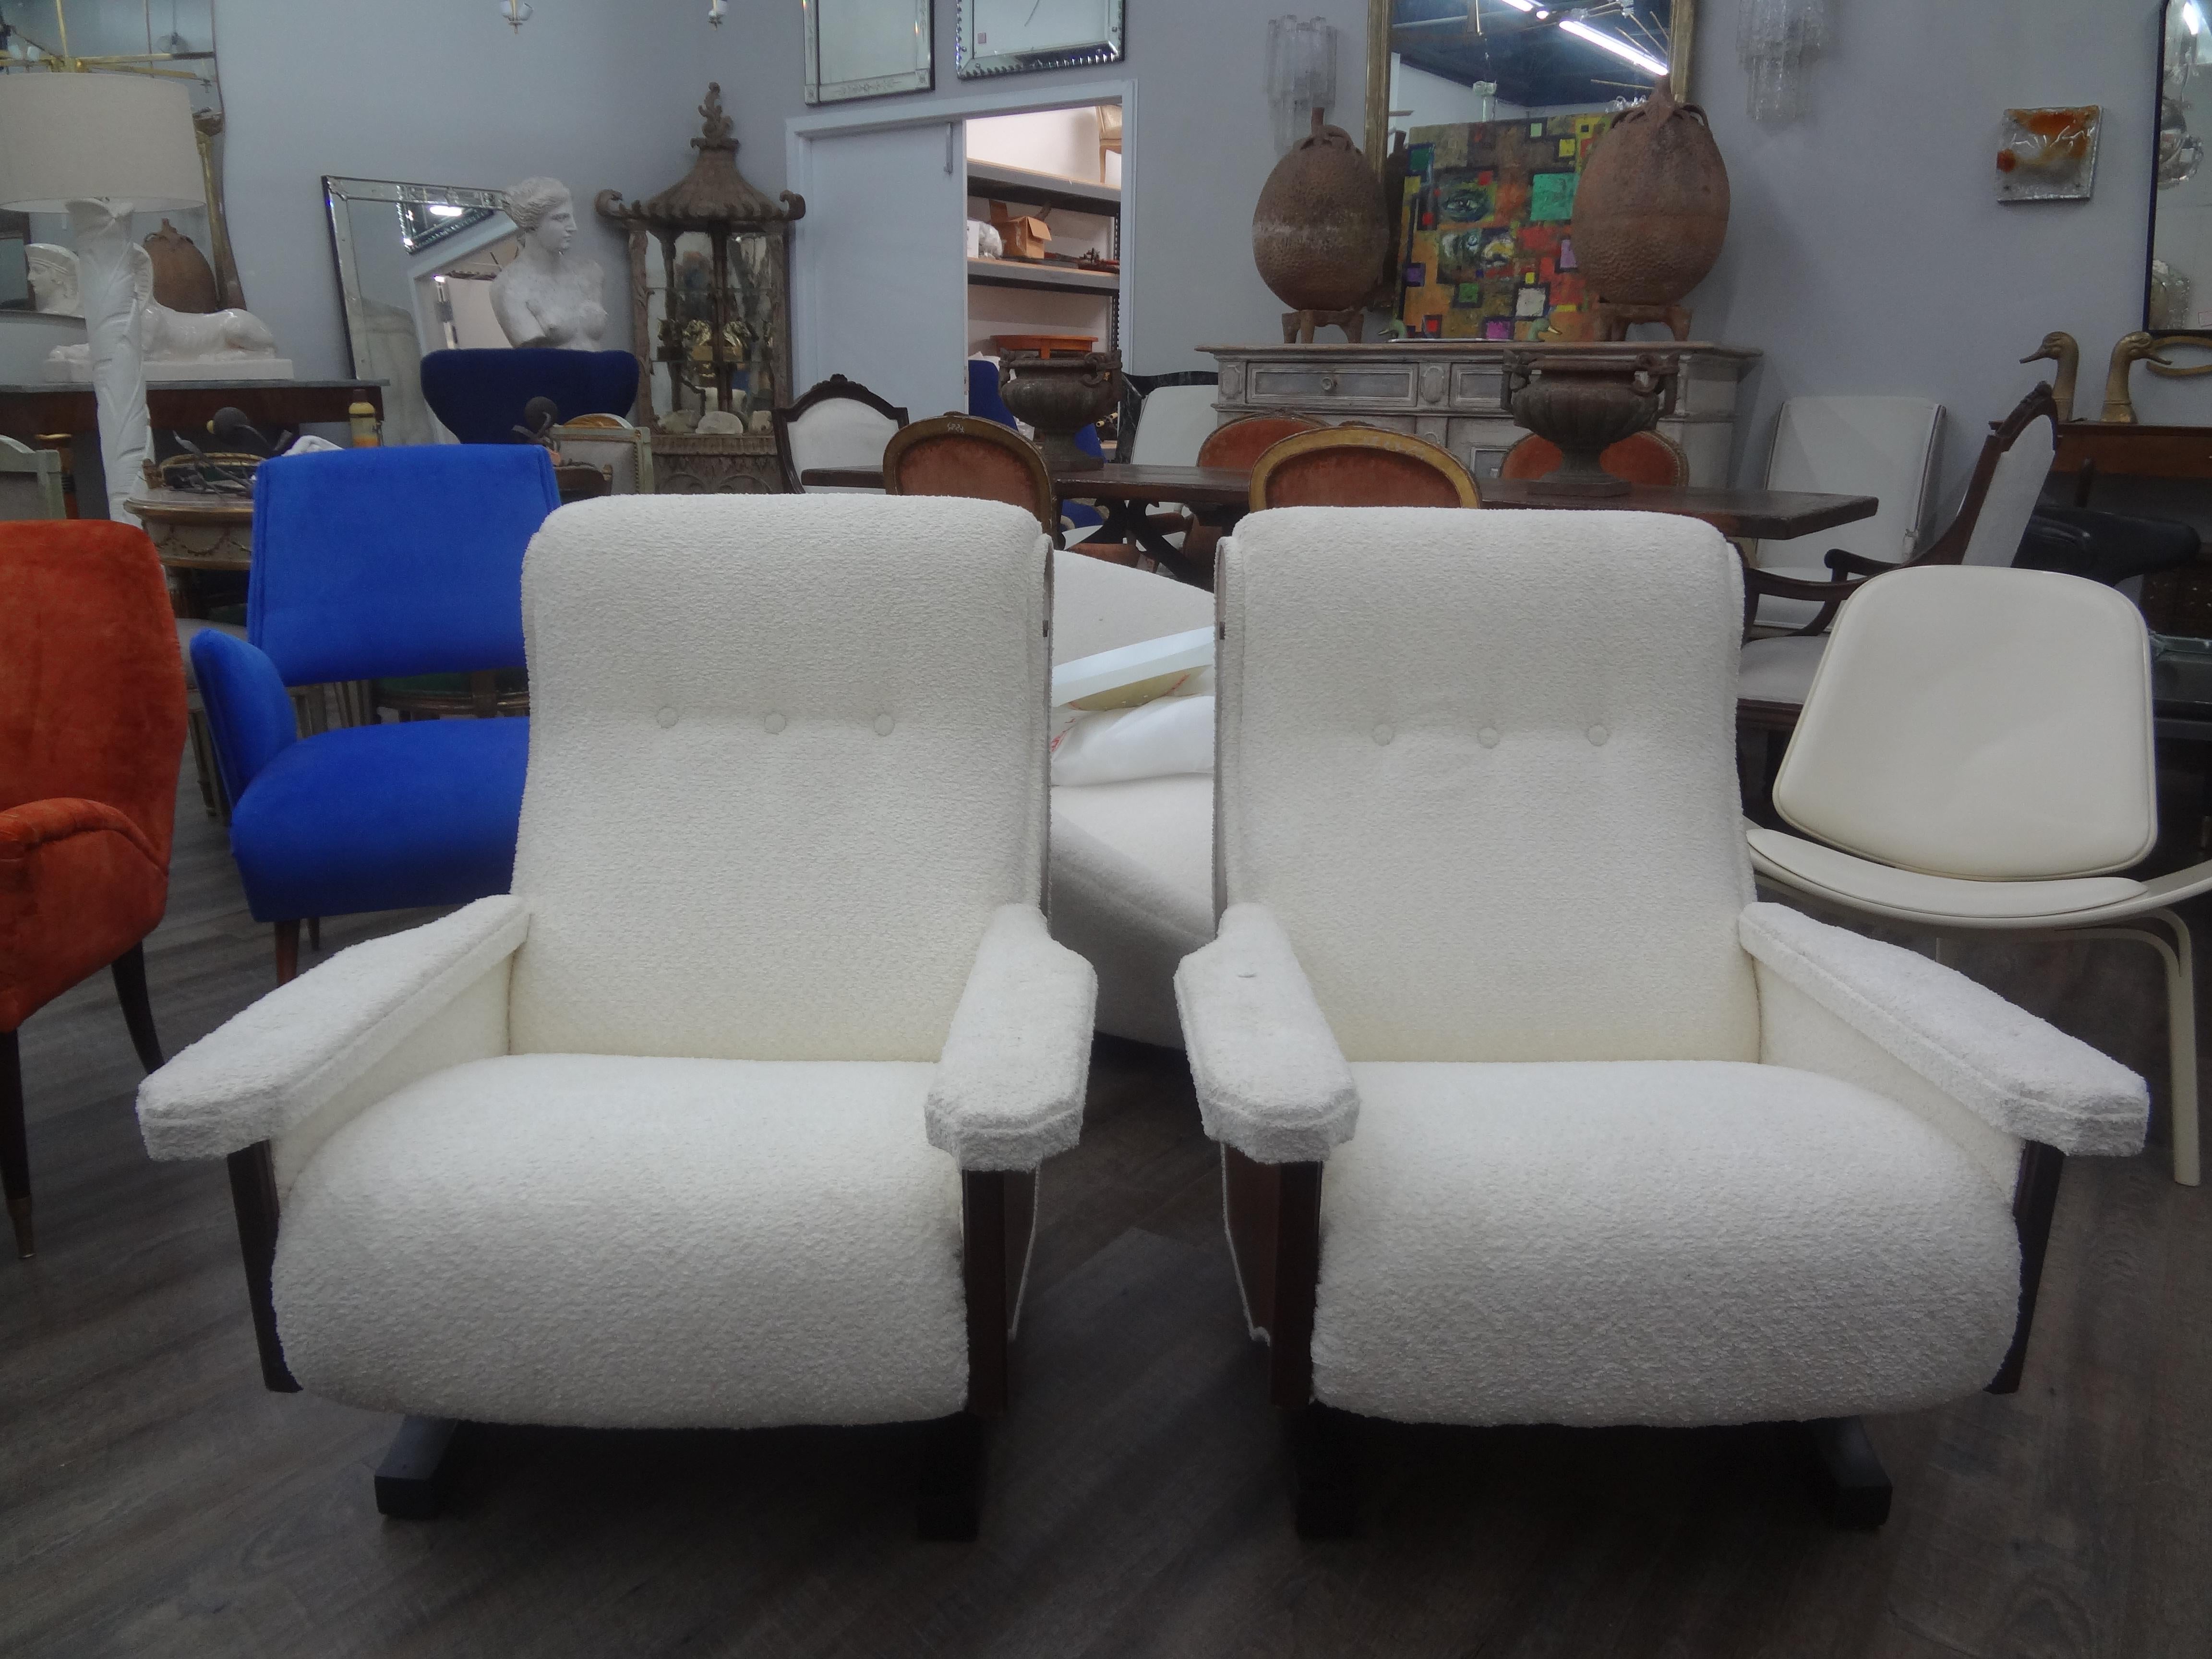 Pair Of Italian Modern Sculptural Lounge Chairs Inspired By Paolo Buffa.
This unusual pair of Italian mid century modern walnut lounge chairs are recently upholstered in white boucle fabric and are most comfortable.
Stunning from every angle!